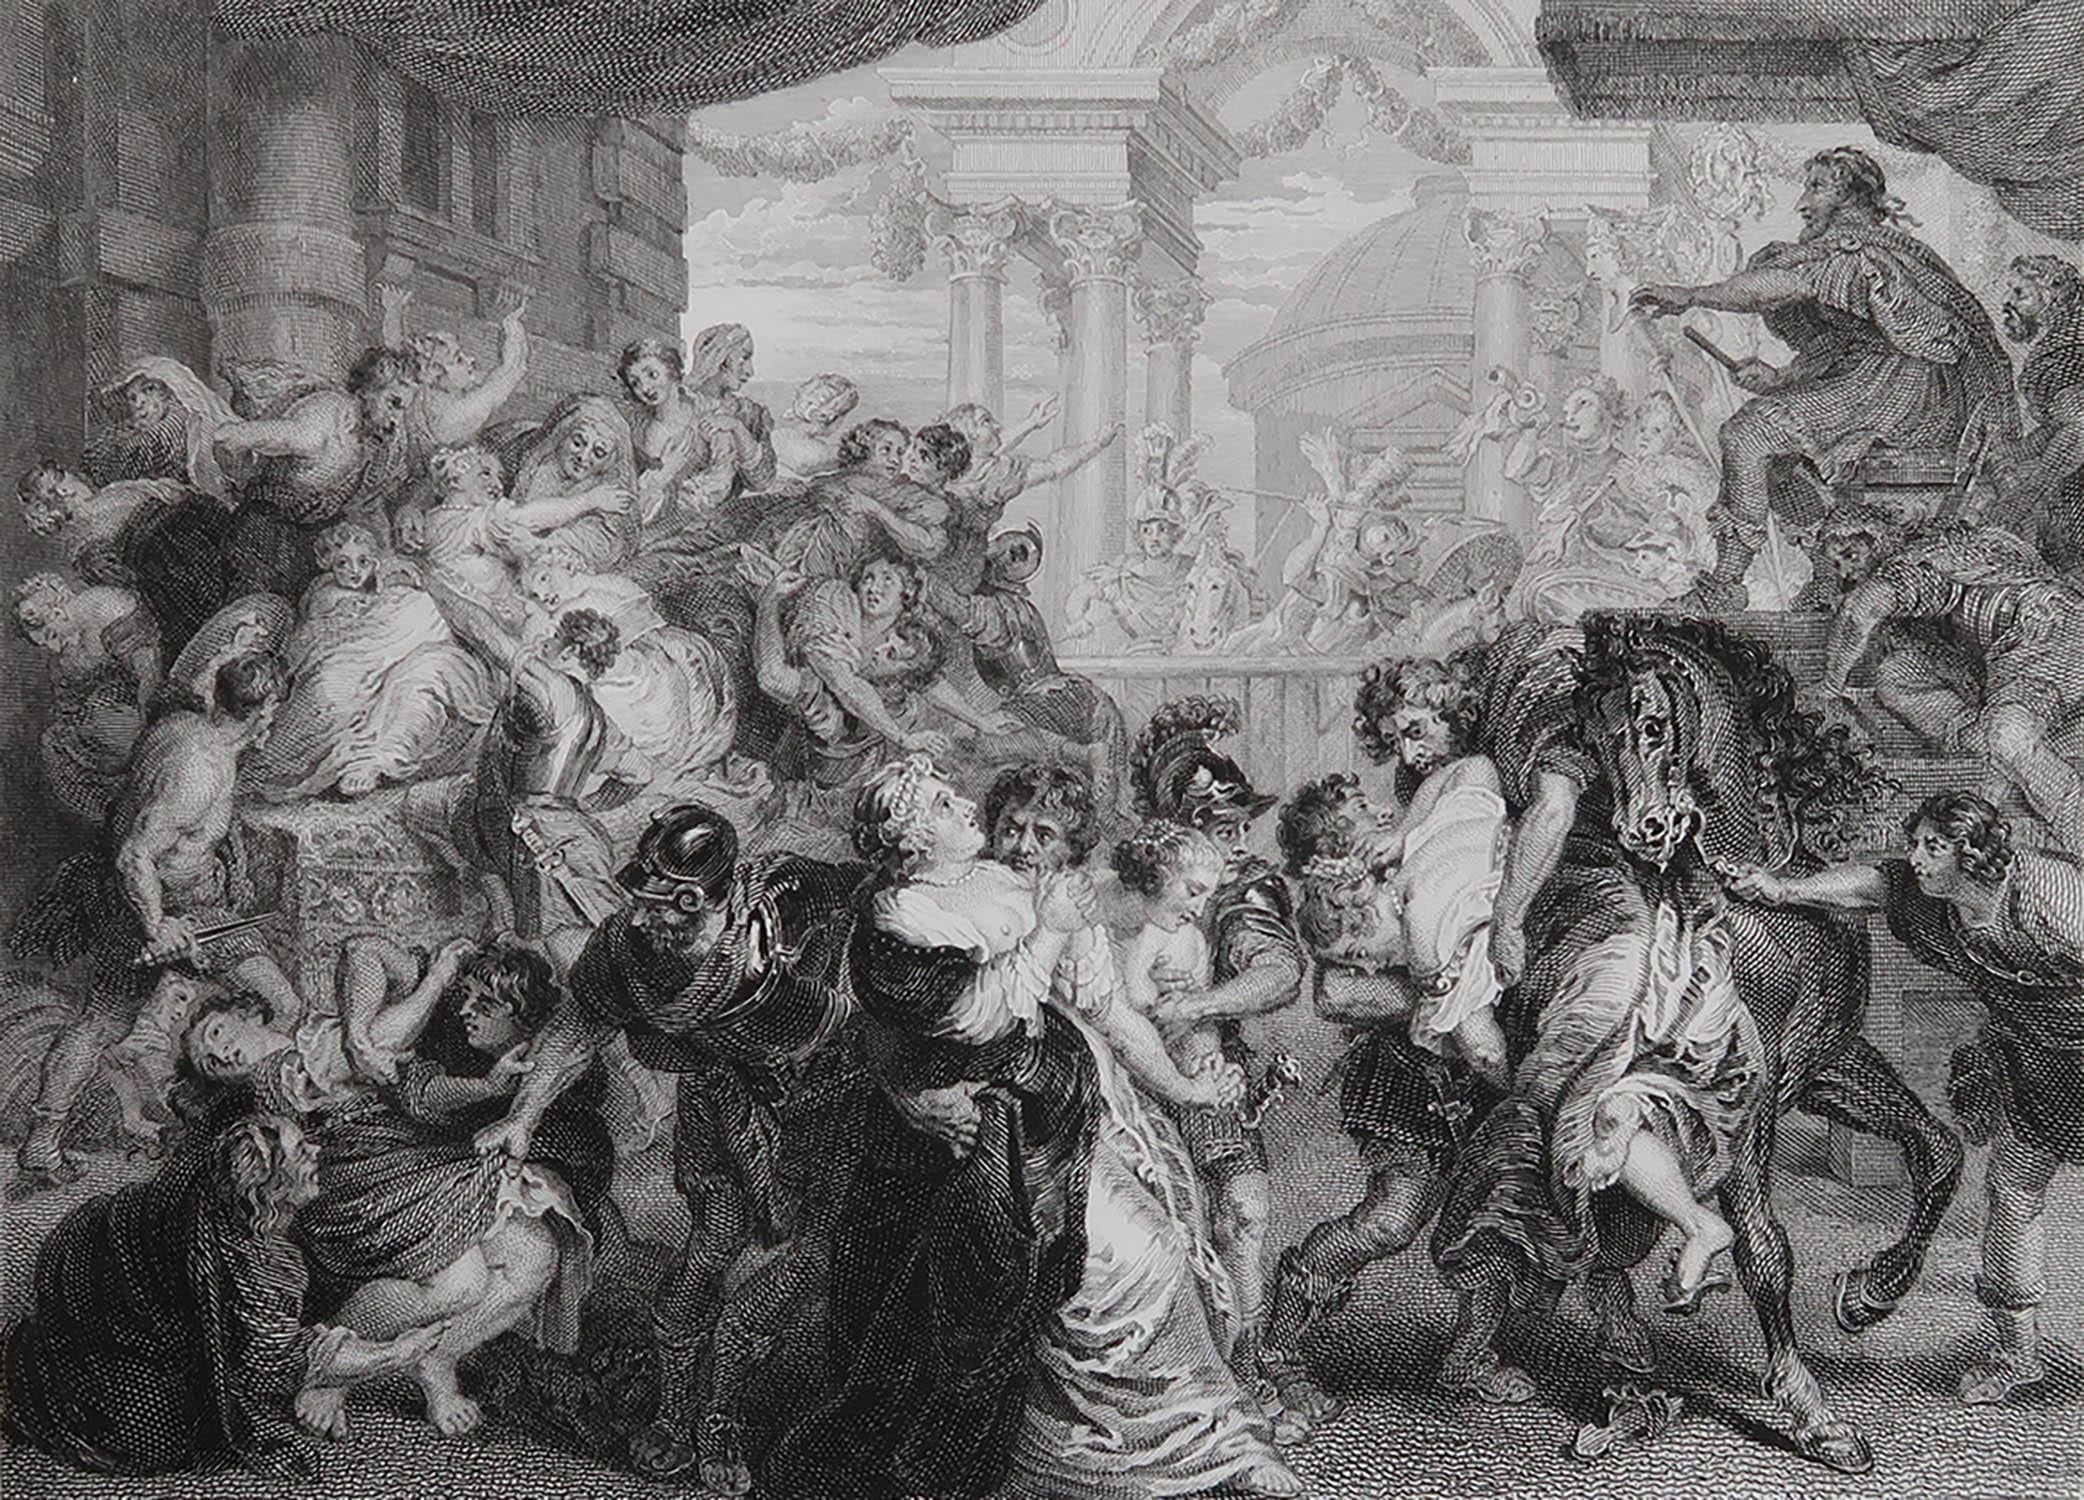 Wonderful image of The Rape of The Sabines

Fine steel engraving

Published by Jones & Co.. C.1840

Unframed.

